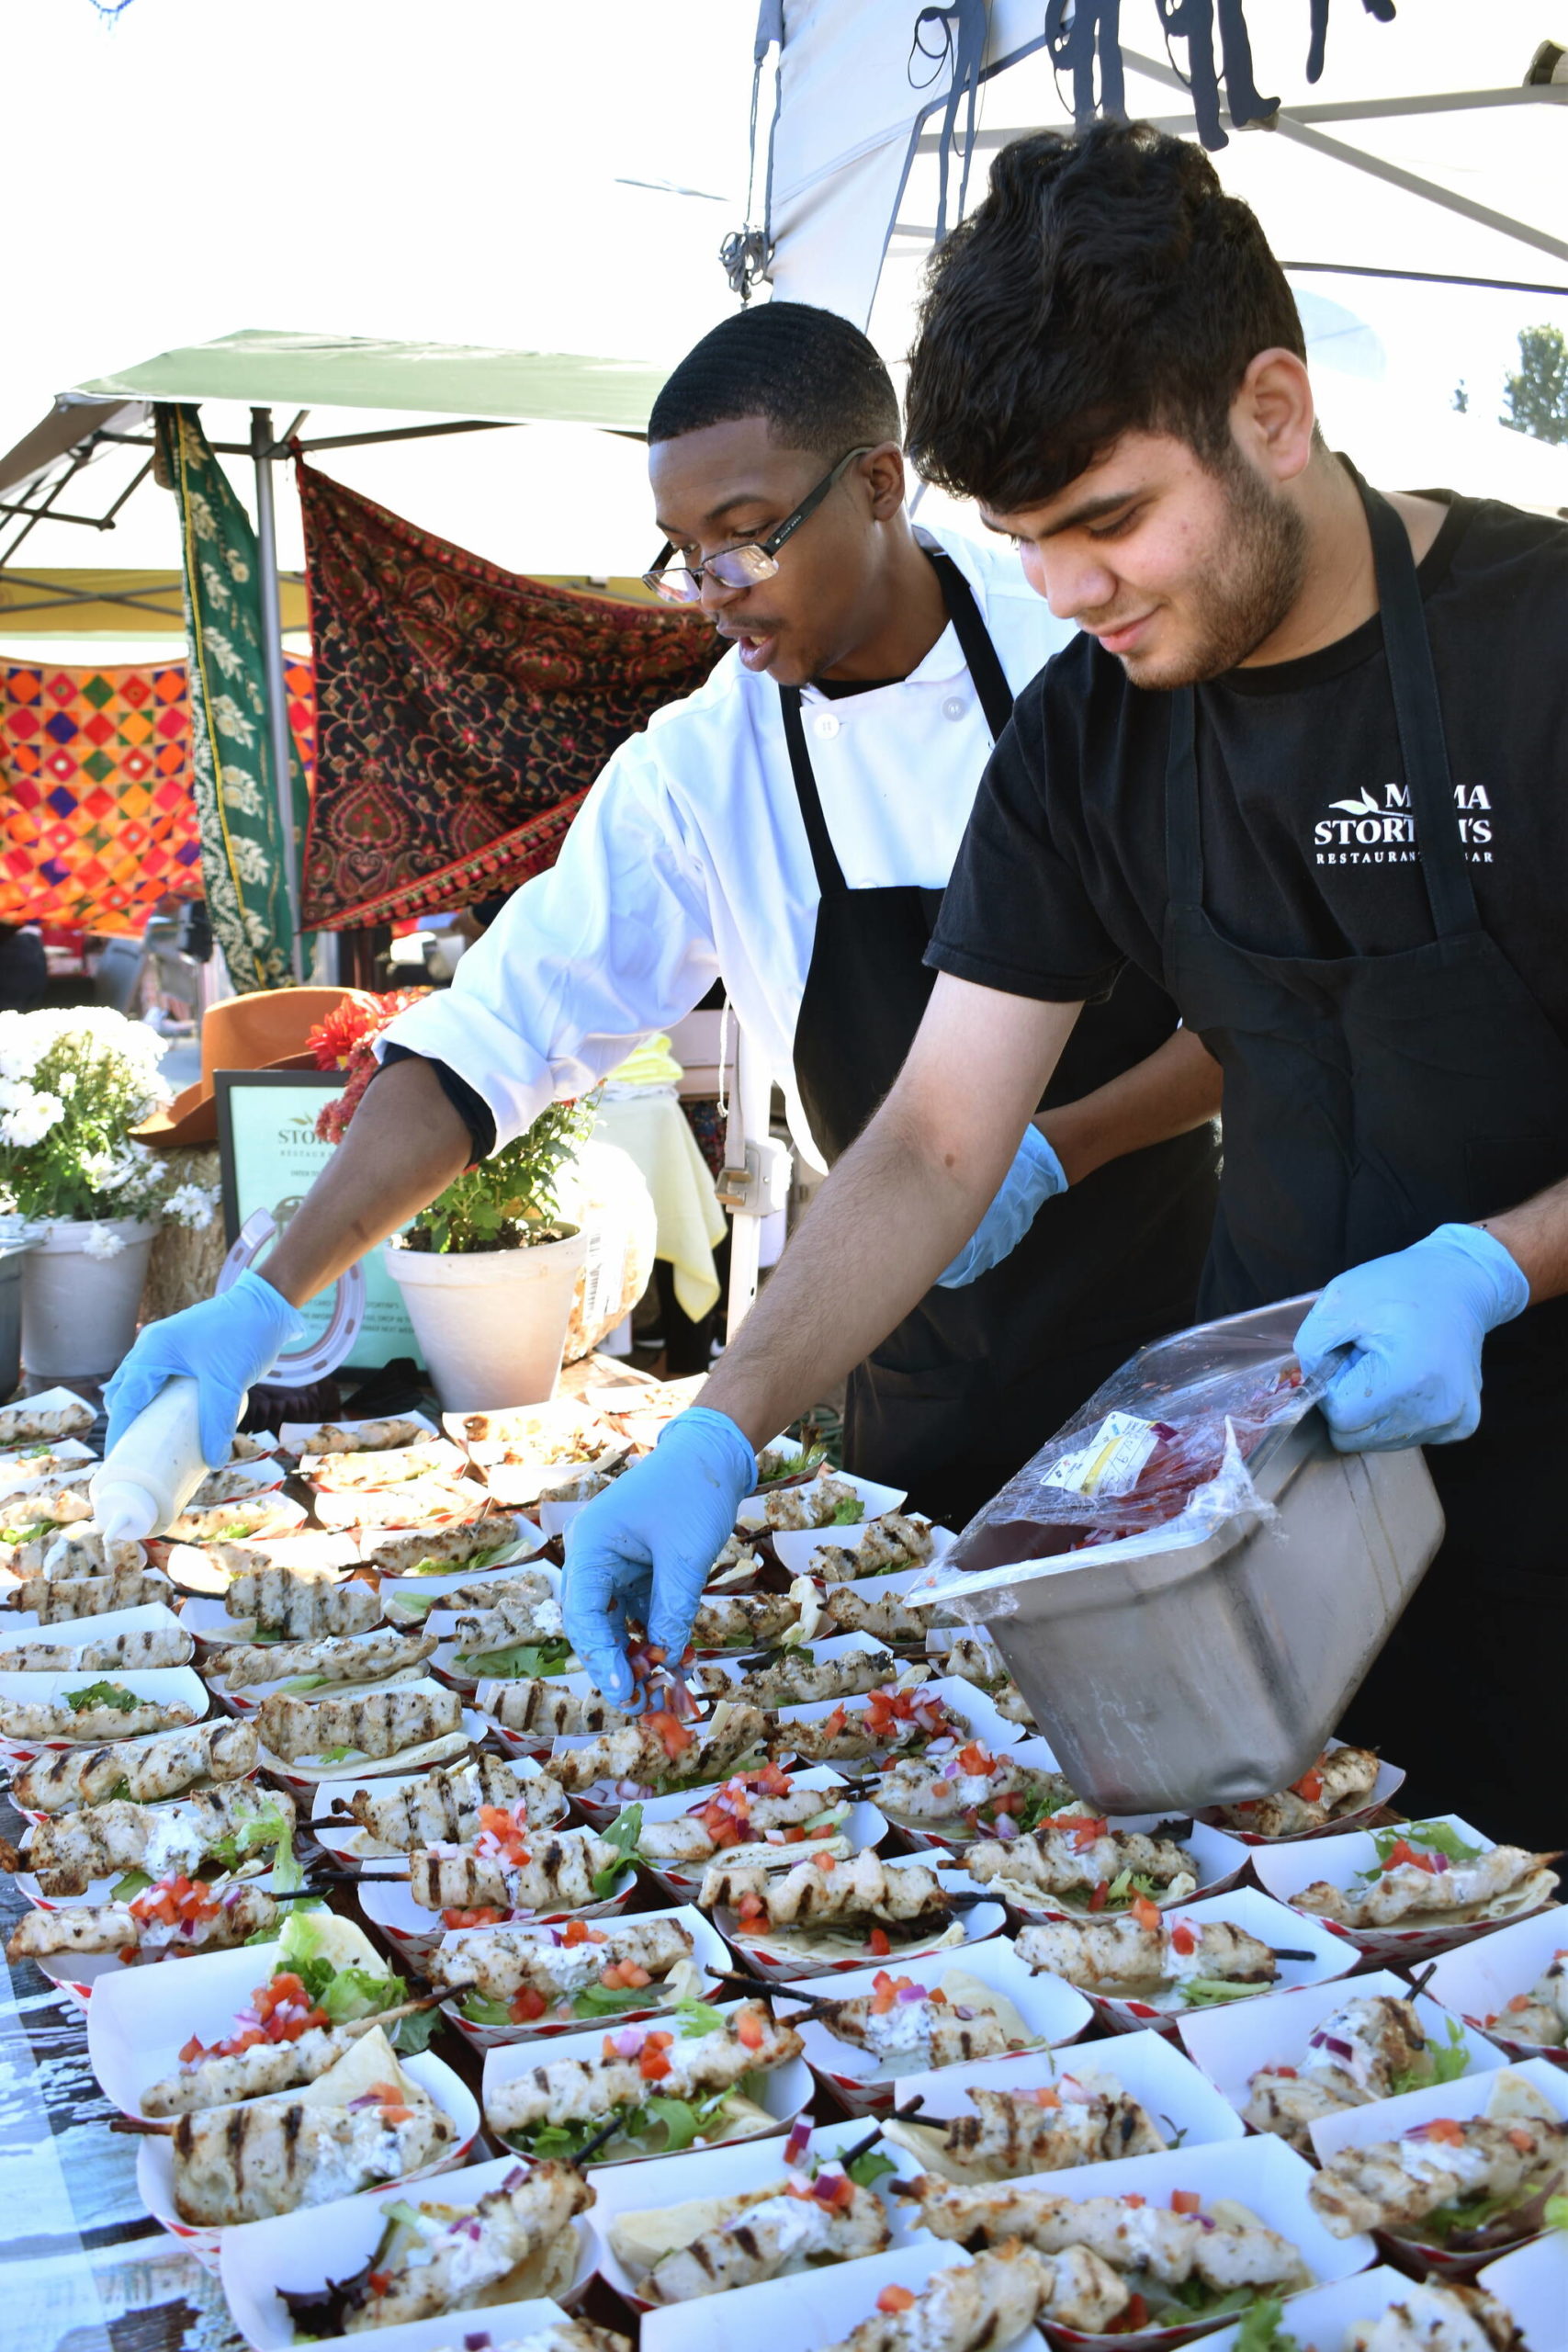 Hassan Obabunmi, left, and Masih Rahmani prepare marinated chicken skewers for Mama Stortini’s entry at the Taste of Federal Way.